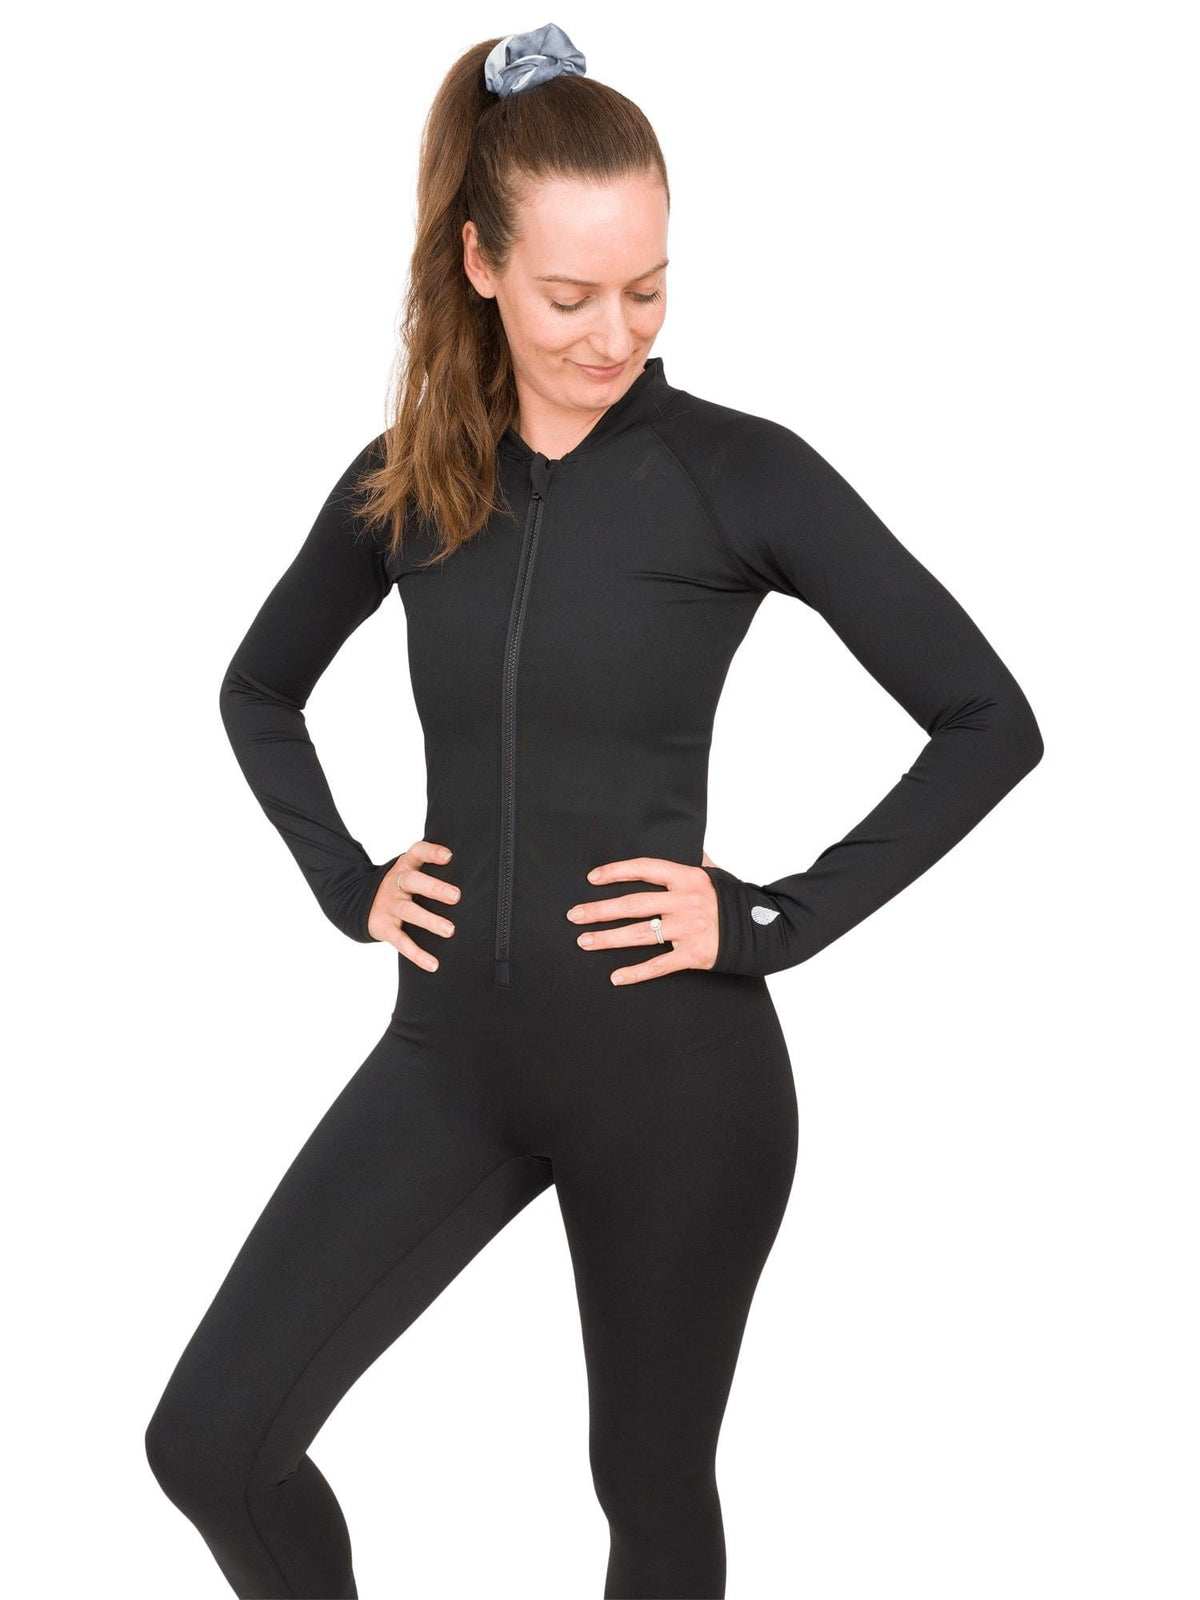 Model: Laura is our Chief Product Officer at Waterlust, a scuba diver, kiter and recreational yogi. She is 5’10, 147 lbs, 34B and is wearing a M full body sun suit.